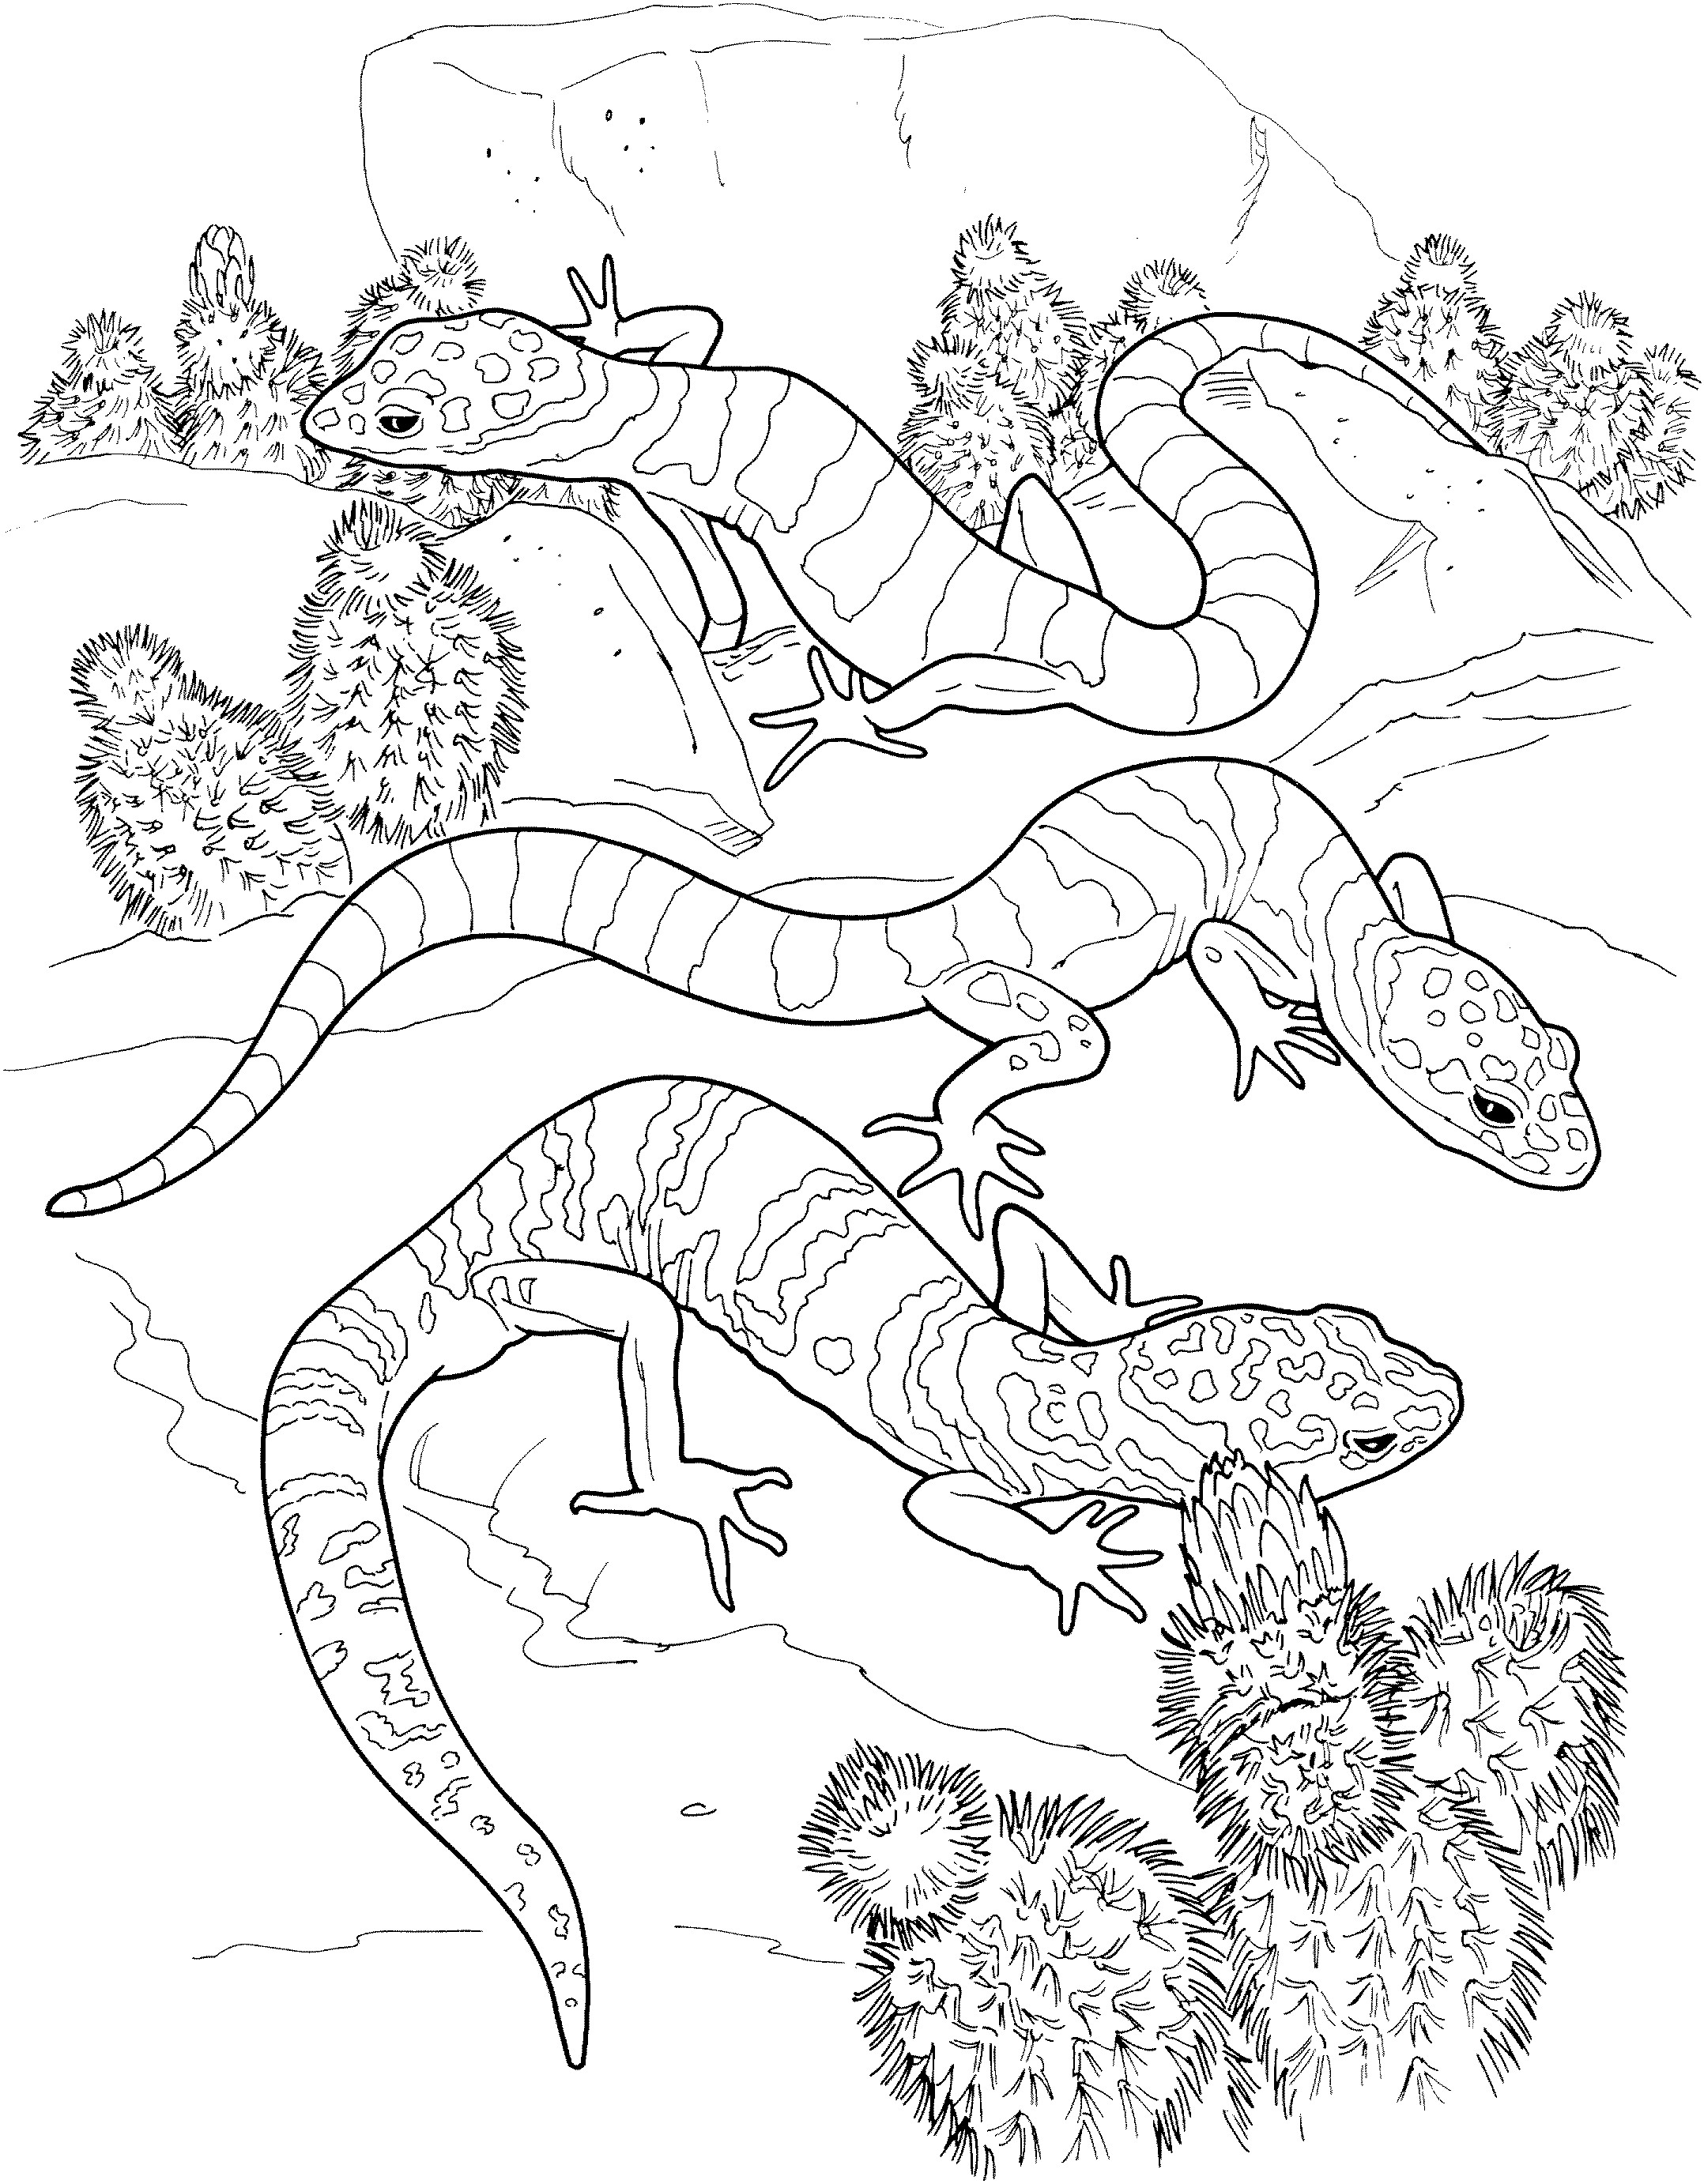 Lizard Coloring Pages
 Free Lizard Coloring Pages